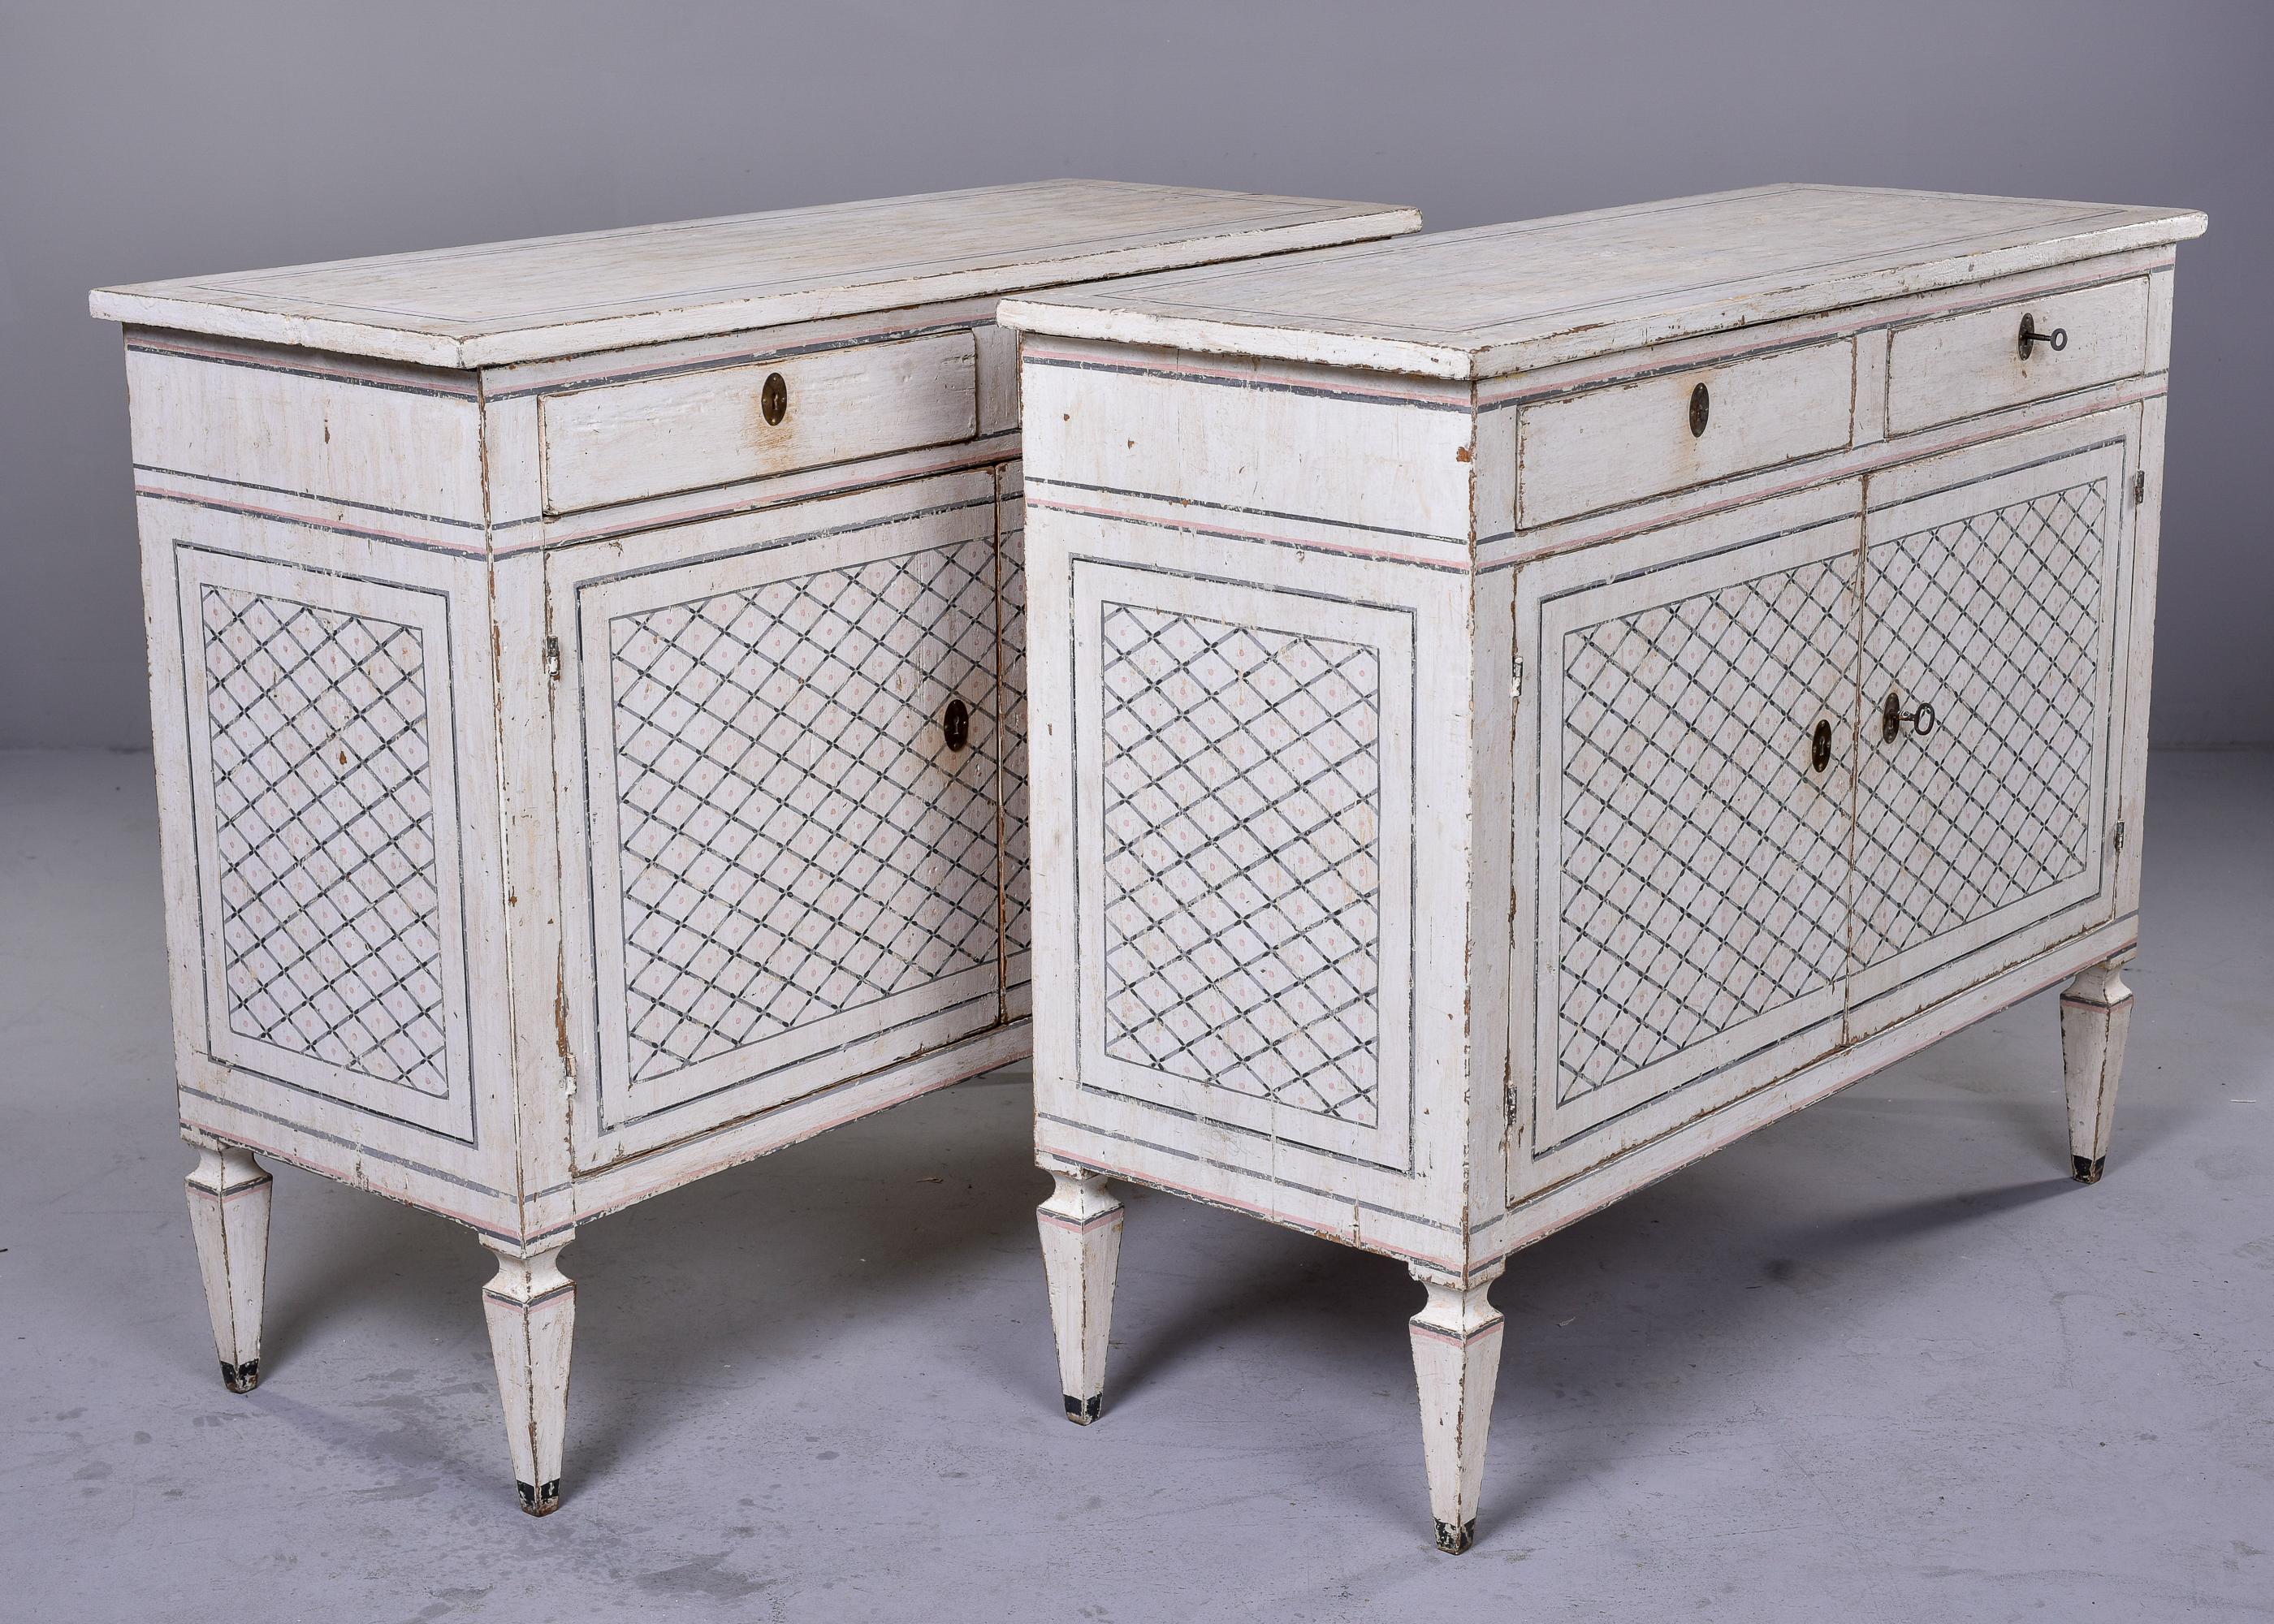 Found in Italy, this pair of cabinets from the Bologna region date from approximately the 1840s. Each cabinet has a rustic white painted finish with a painted pale gray diamond pattern on the cabinet doors and sides as well as outlined trim on the